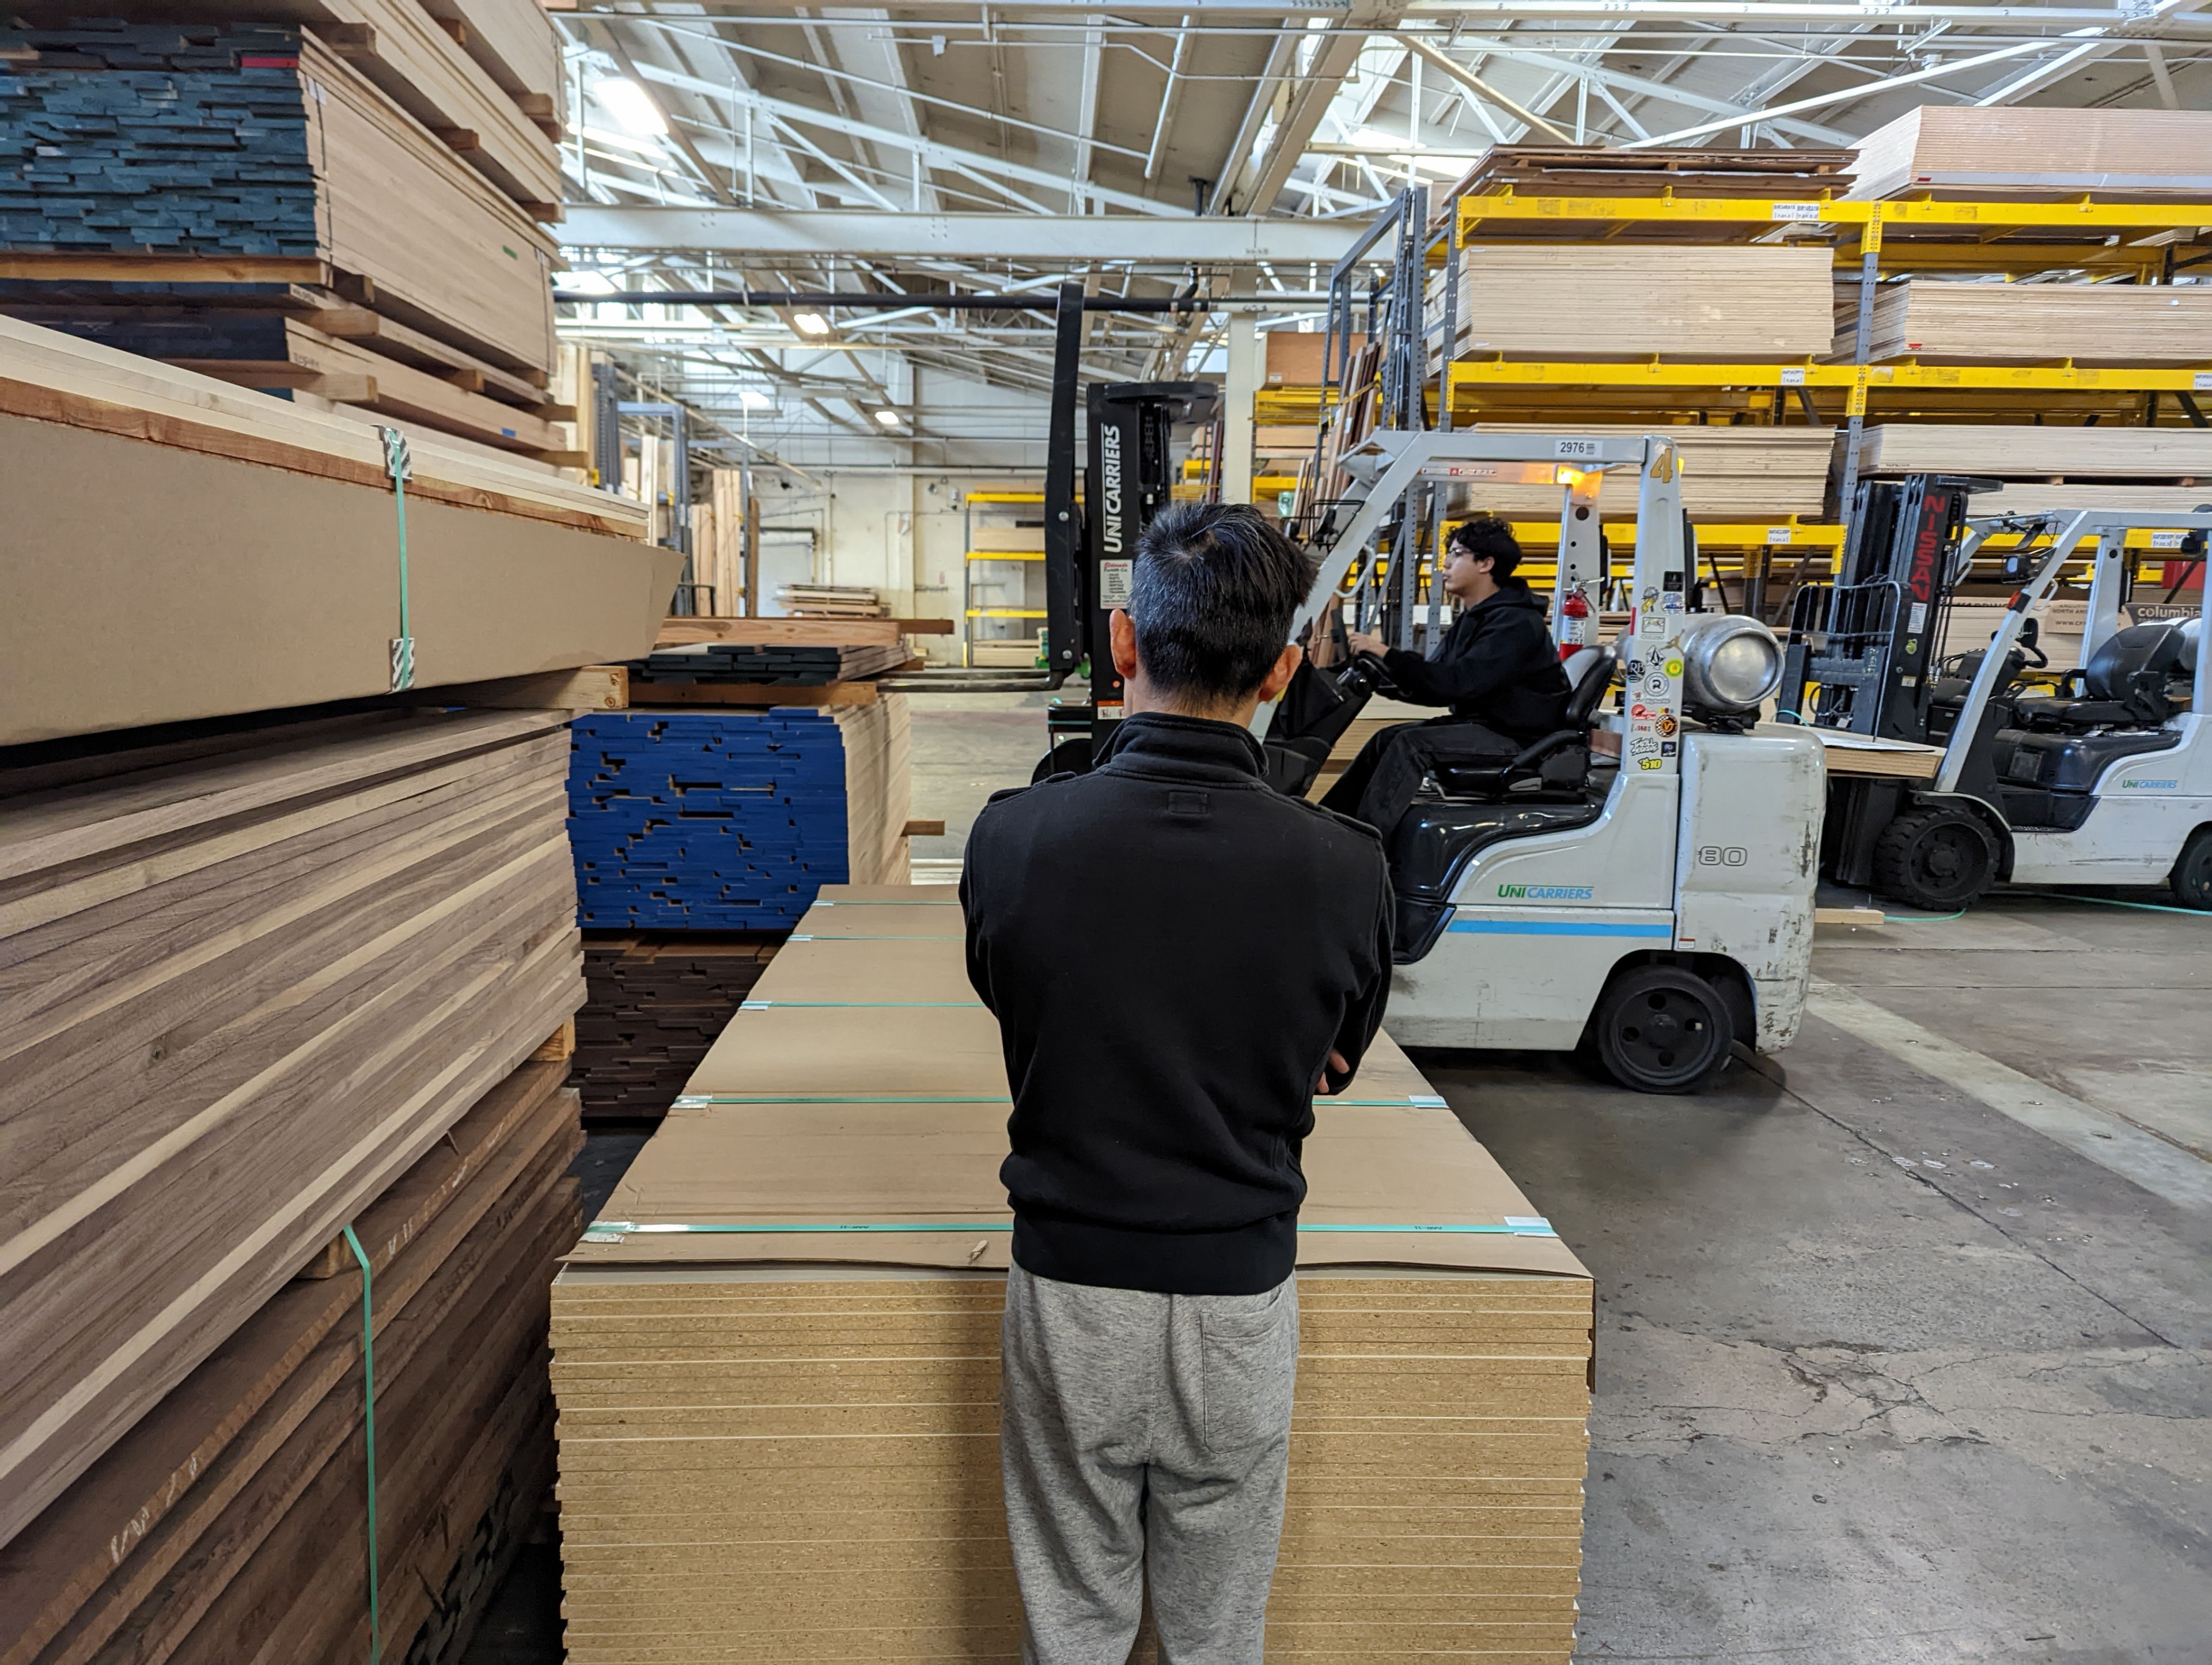 I made my first ever journey to a hardwood lumber yard, to the nearby and highly reviewed Moore Newton. It was quite an experience.